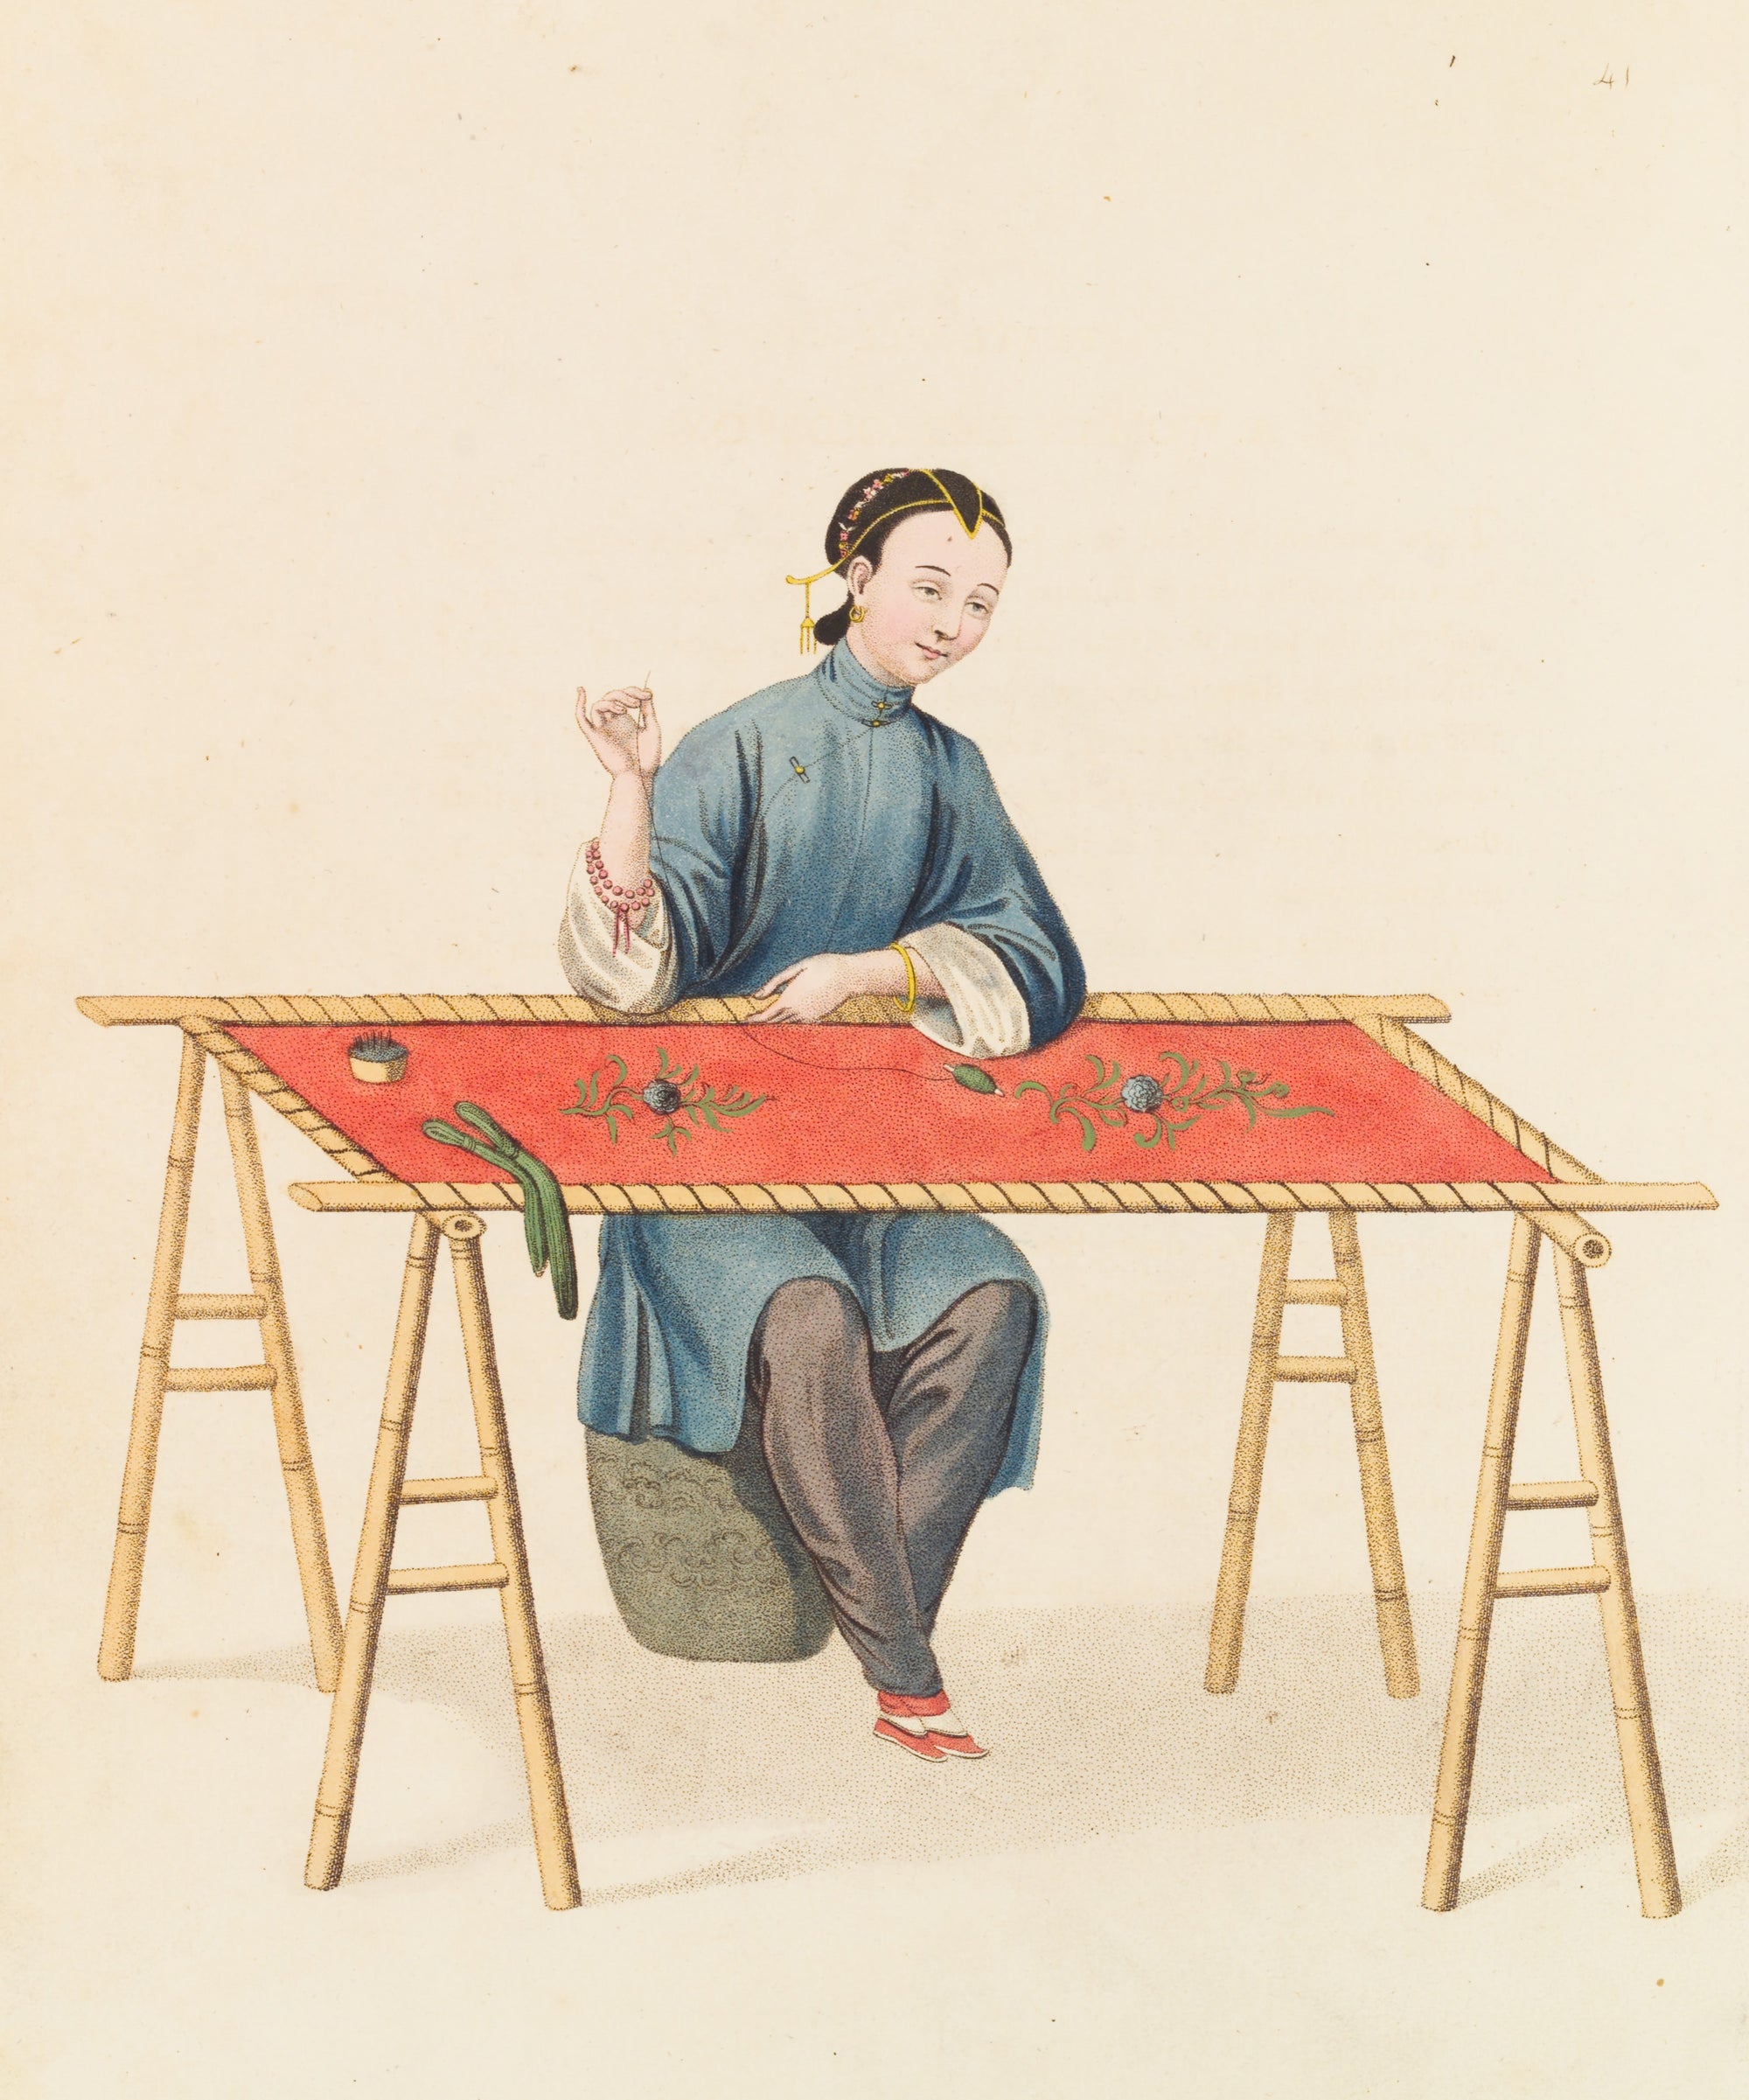 Woman embroidery at a table, sewing flowers by hand